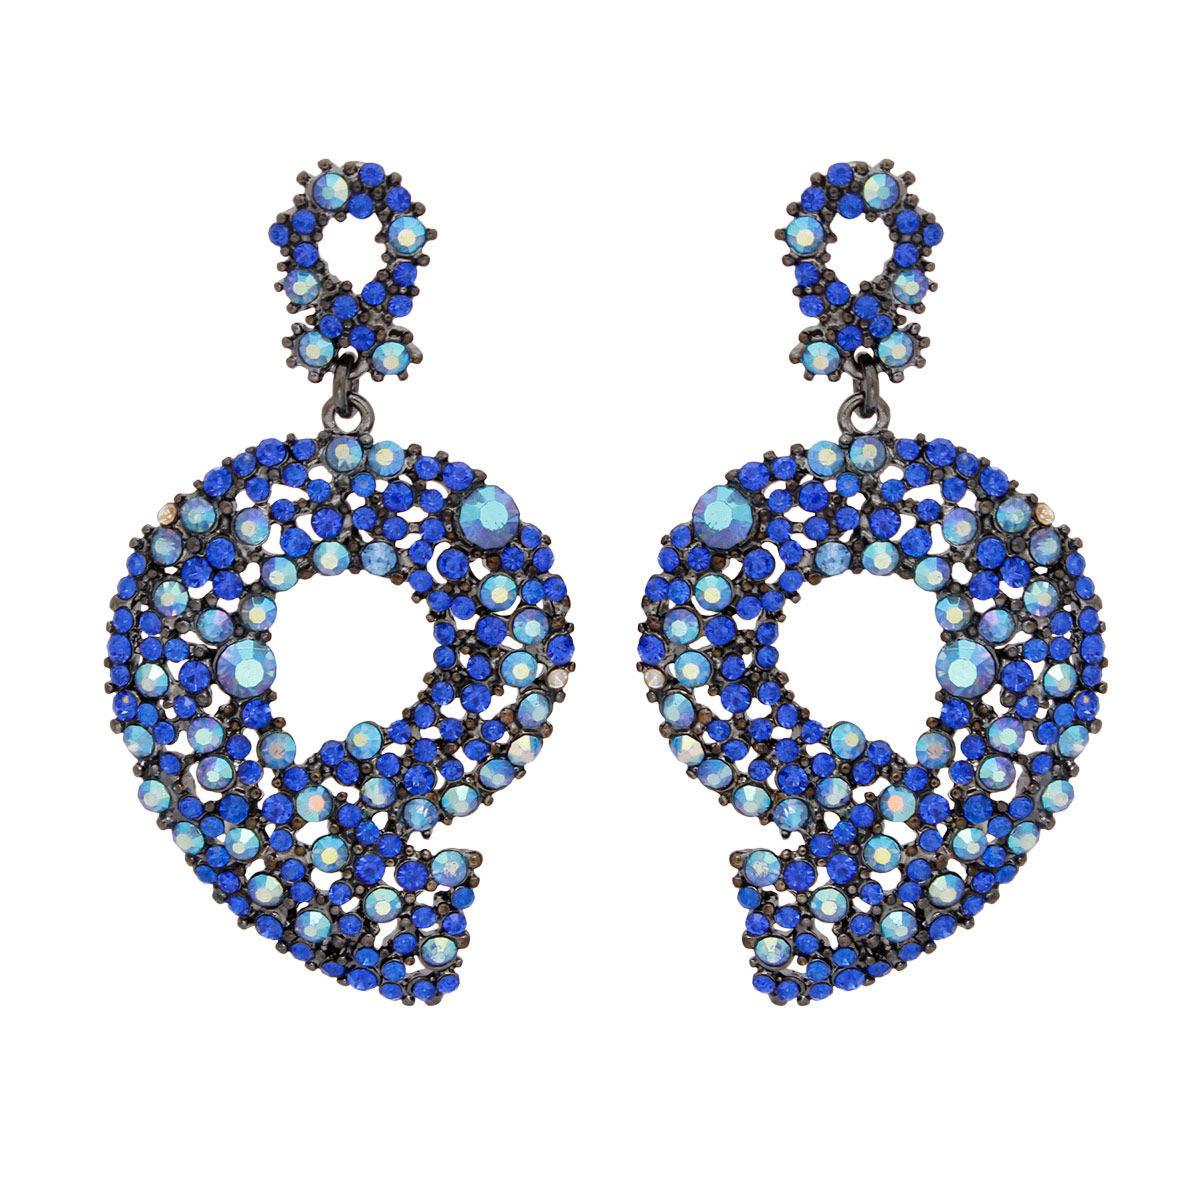 Trendy Blue Dangle Nine Fashion Earrings: Stand Out in Style!